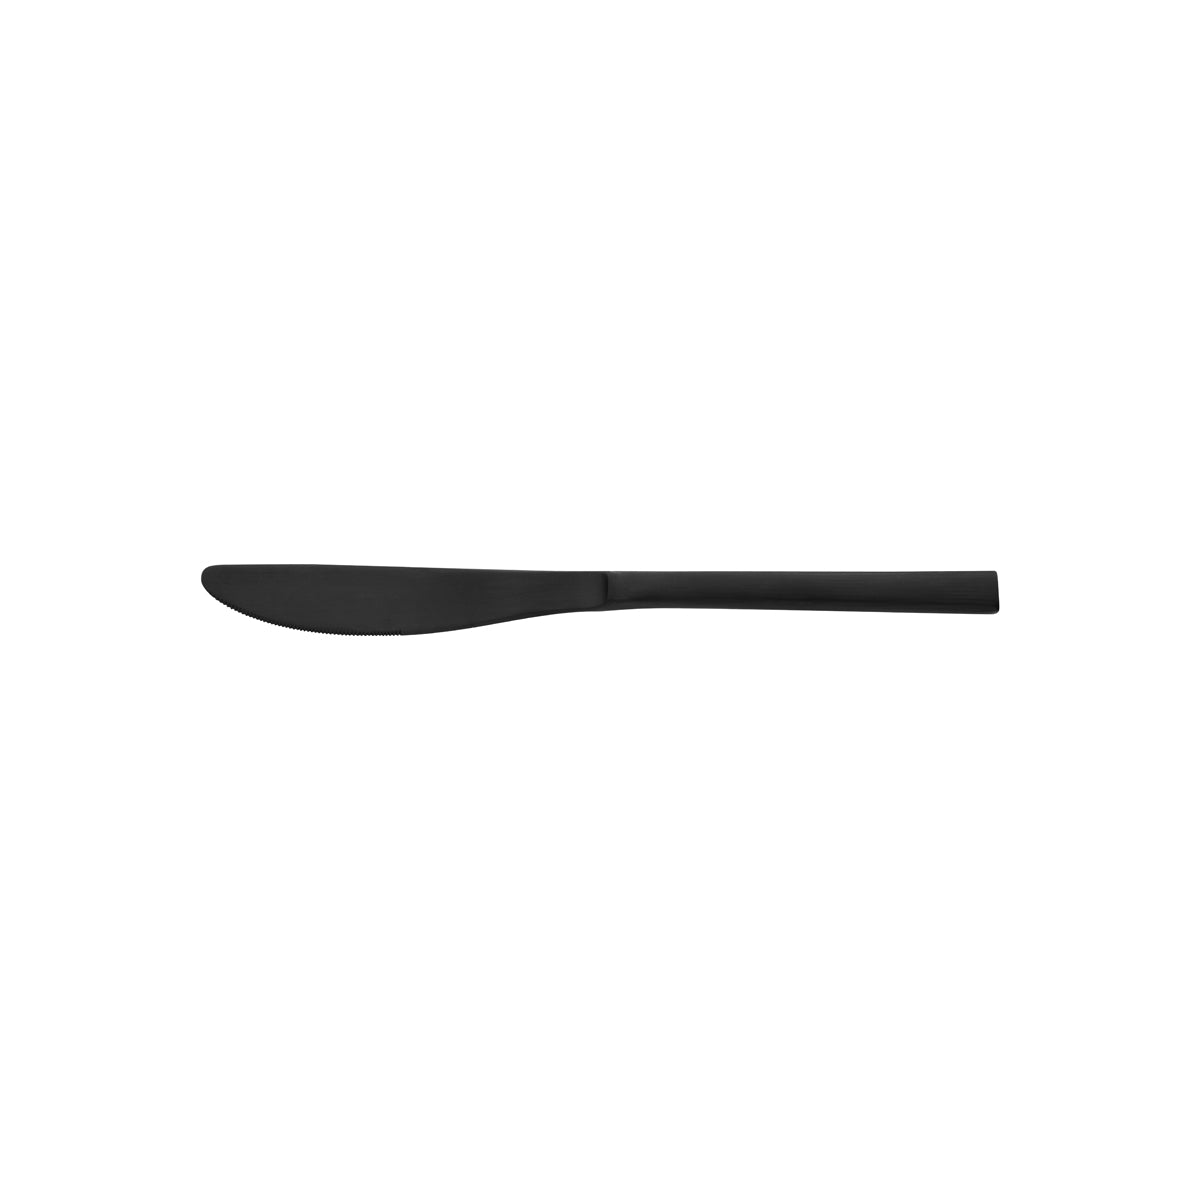 Dessert Knife - Arezzo, Black from Fortessa. made out of Stainless Steel and sold in boxes of 12. Hospitality quality at wholesale price with The Flying Fork! 